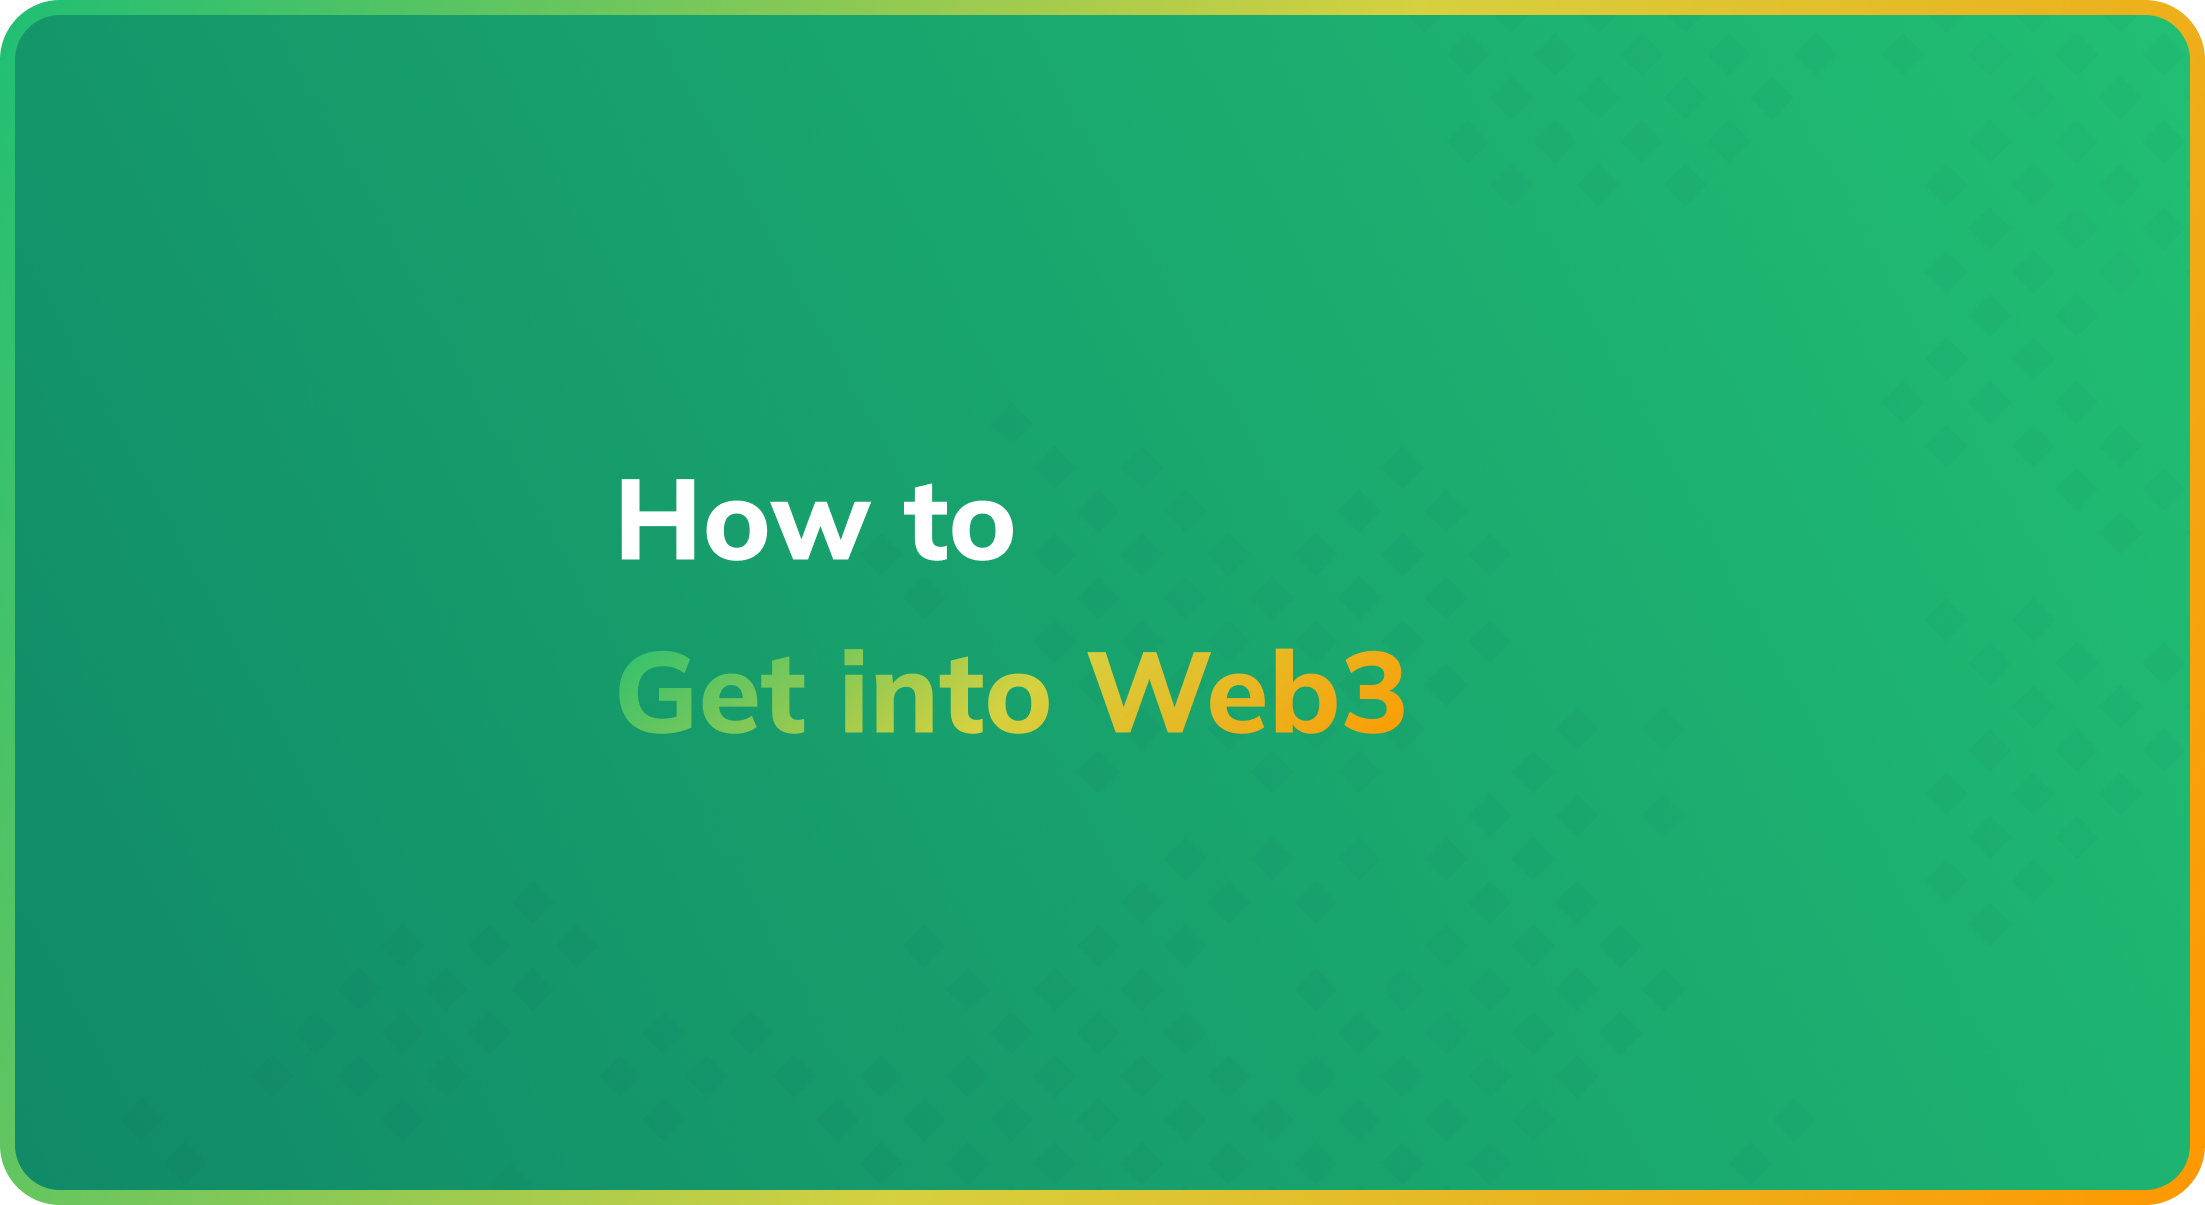 Getting into web3 is easy